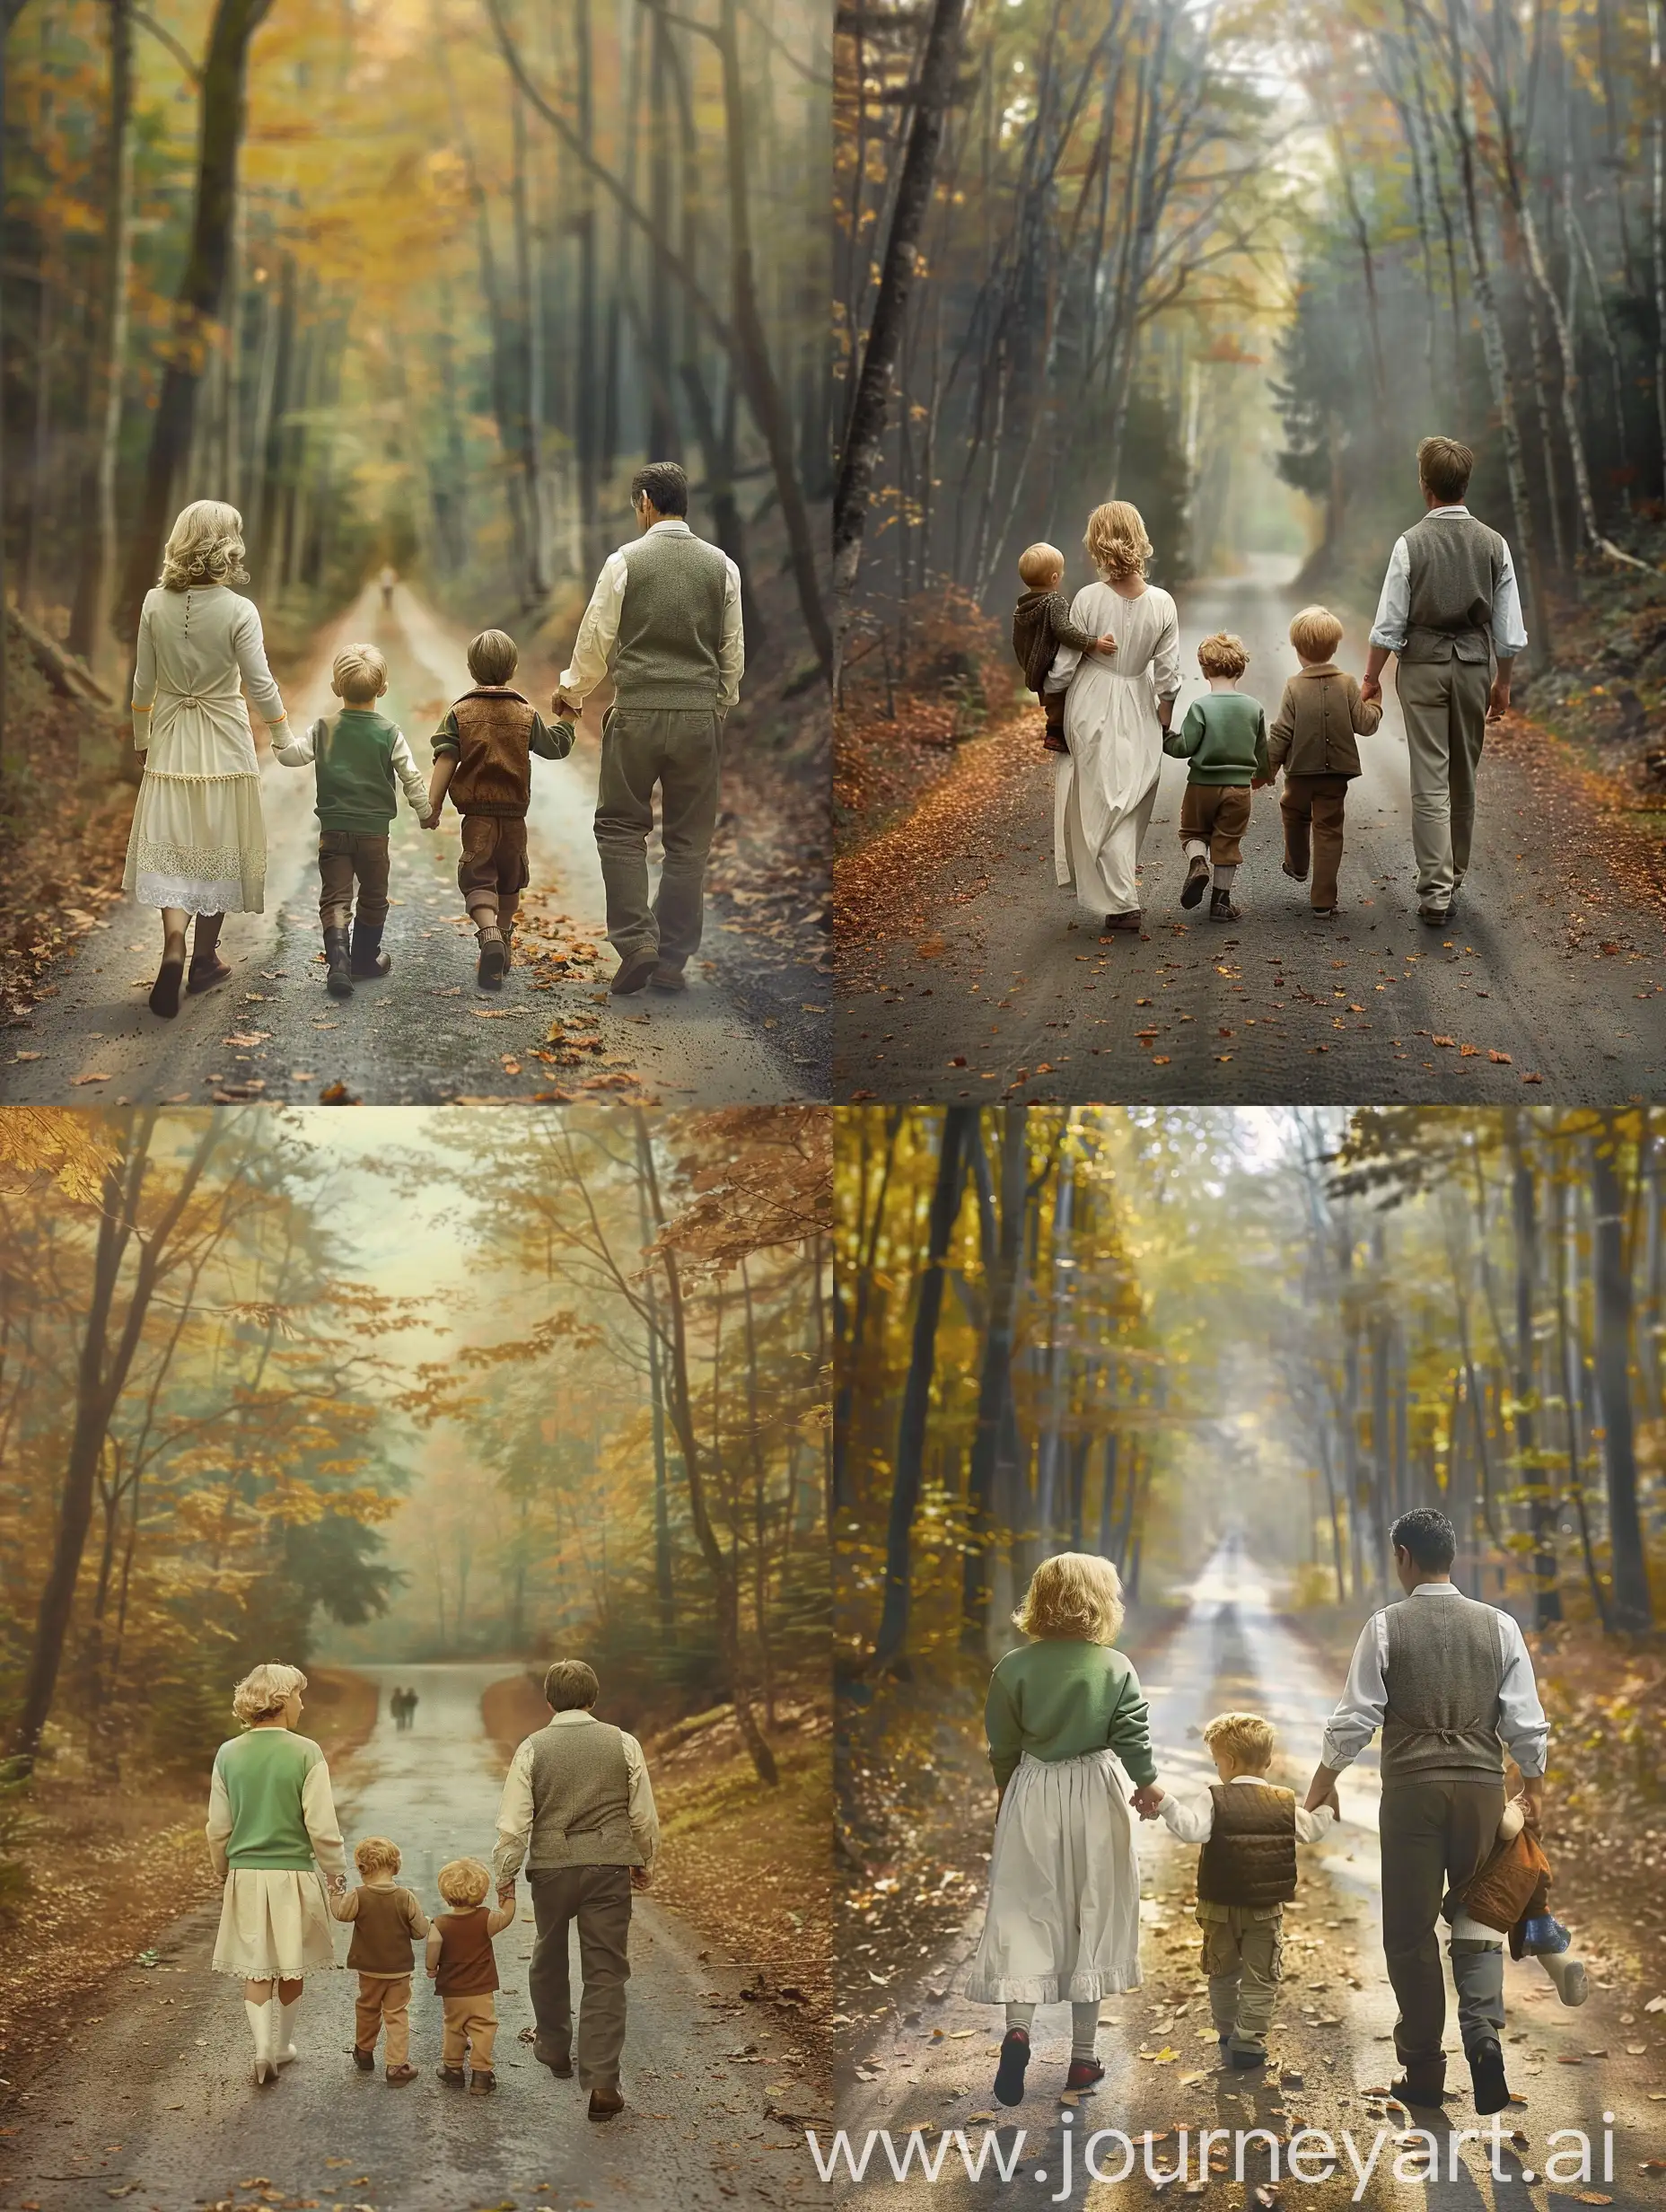 A colorful photo depicting a family of four walking on a forest road. Each parent is holding one of their young children's hands and facing the camera. The mother, with blonde hair and wearing a white dress, is holding the hand of the older son wearing a green sweatshirt. The father, dressed in grey, is holding the hand of the younger son in a brown vest. The road passing through the forest is lined with tall trees and autumn leaves, creating a serene and pleasant atmosphere. Soft sunlight filters through the trees, illuminating the surroundings. This image effectively conveys warmth, family, and the tranquility of nature with high clarity (in focus), depth of field, captured by Steve McCurry, realistic photography, precise details, 3:4 aspect ratio, V6.